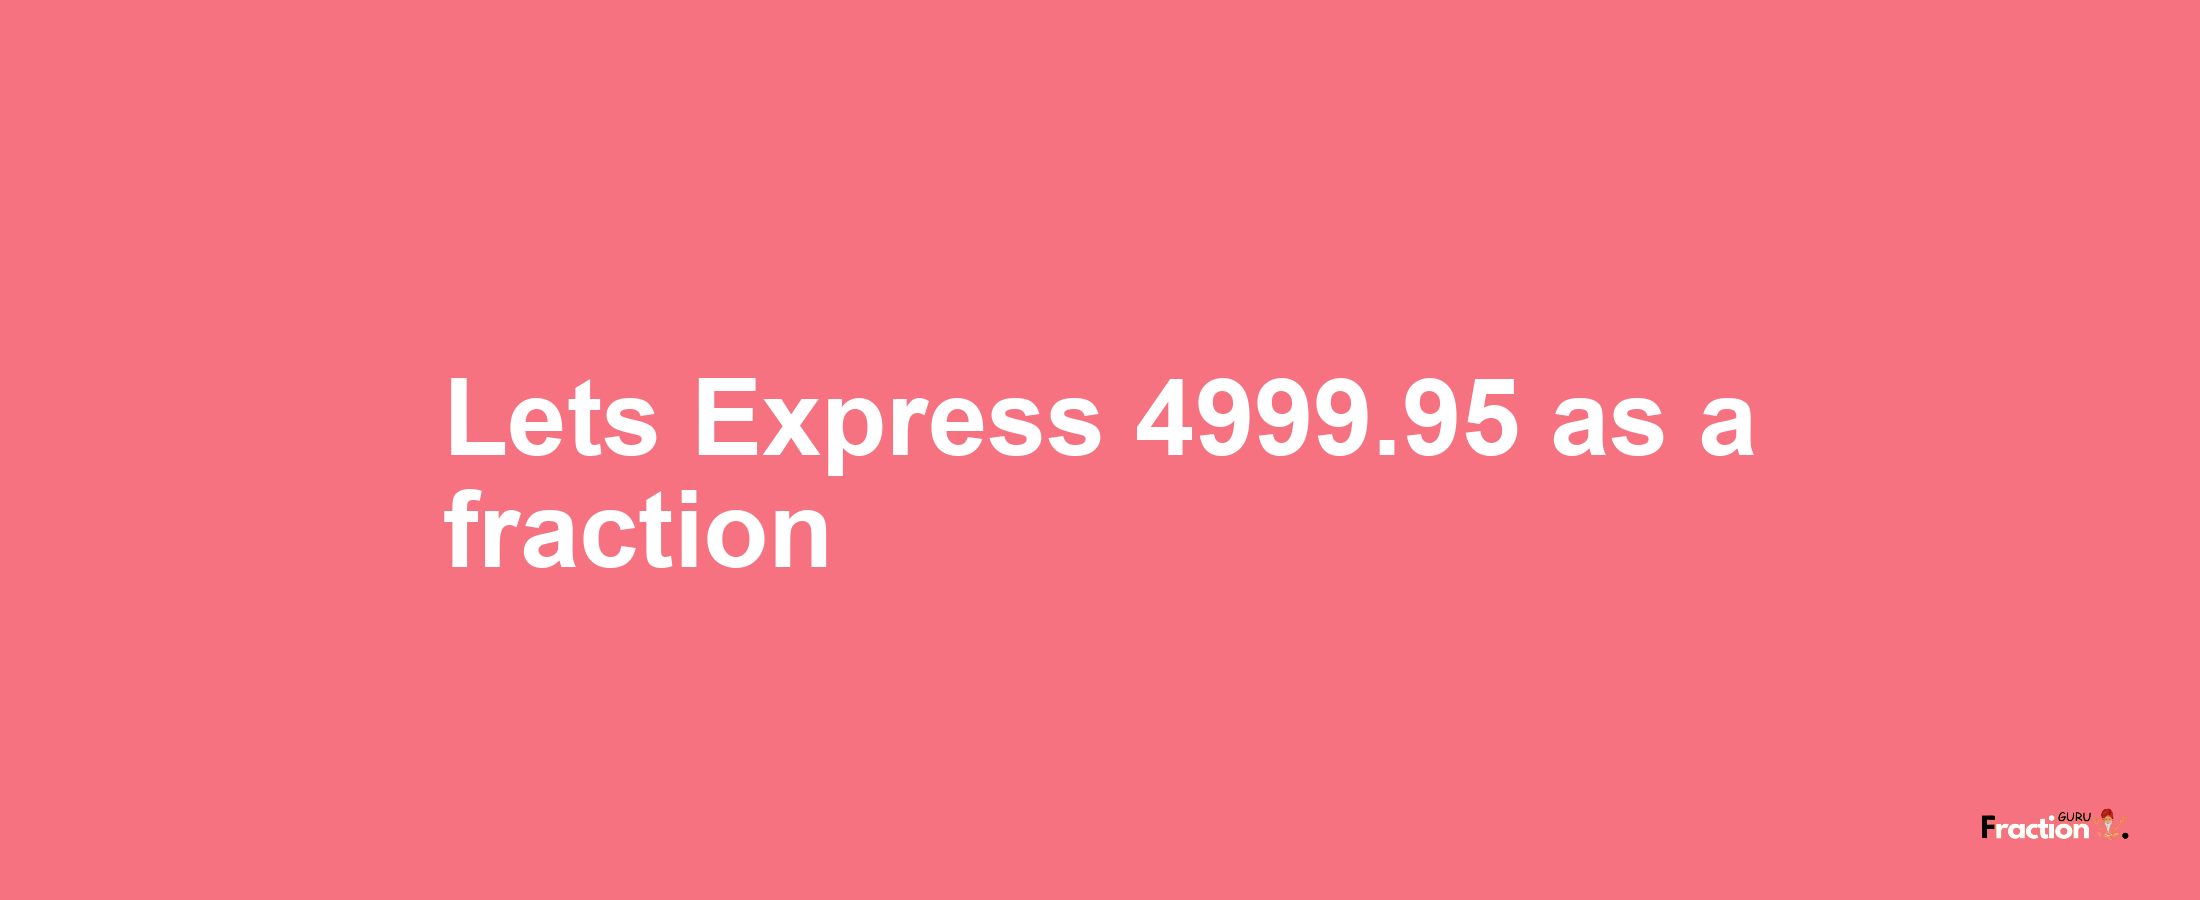 Lets Express 4999.95 as afraction